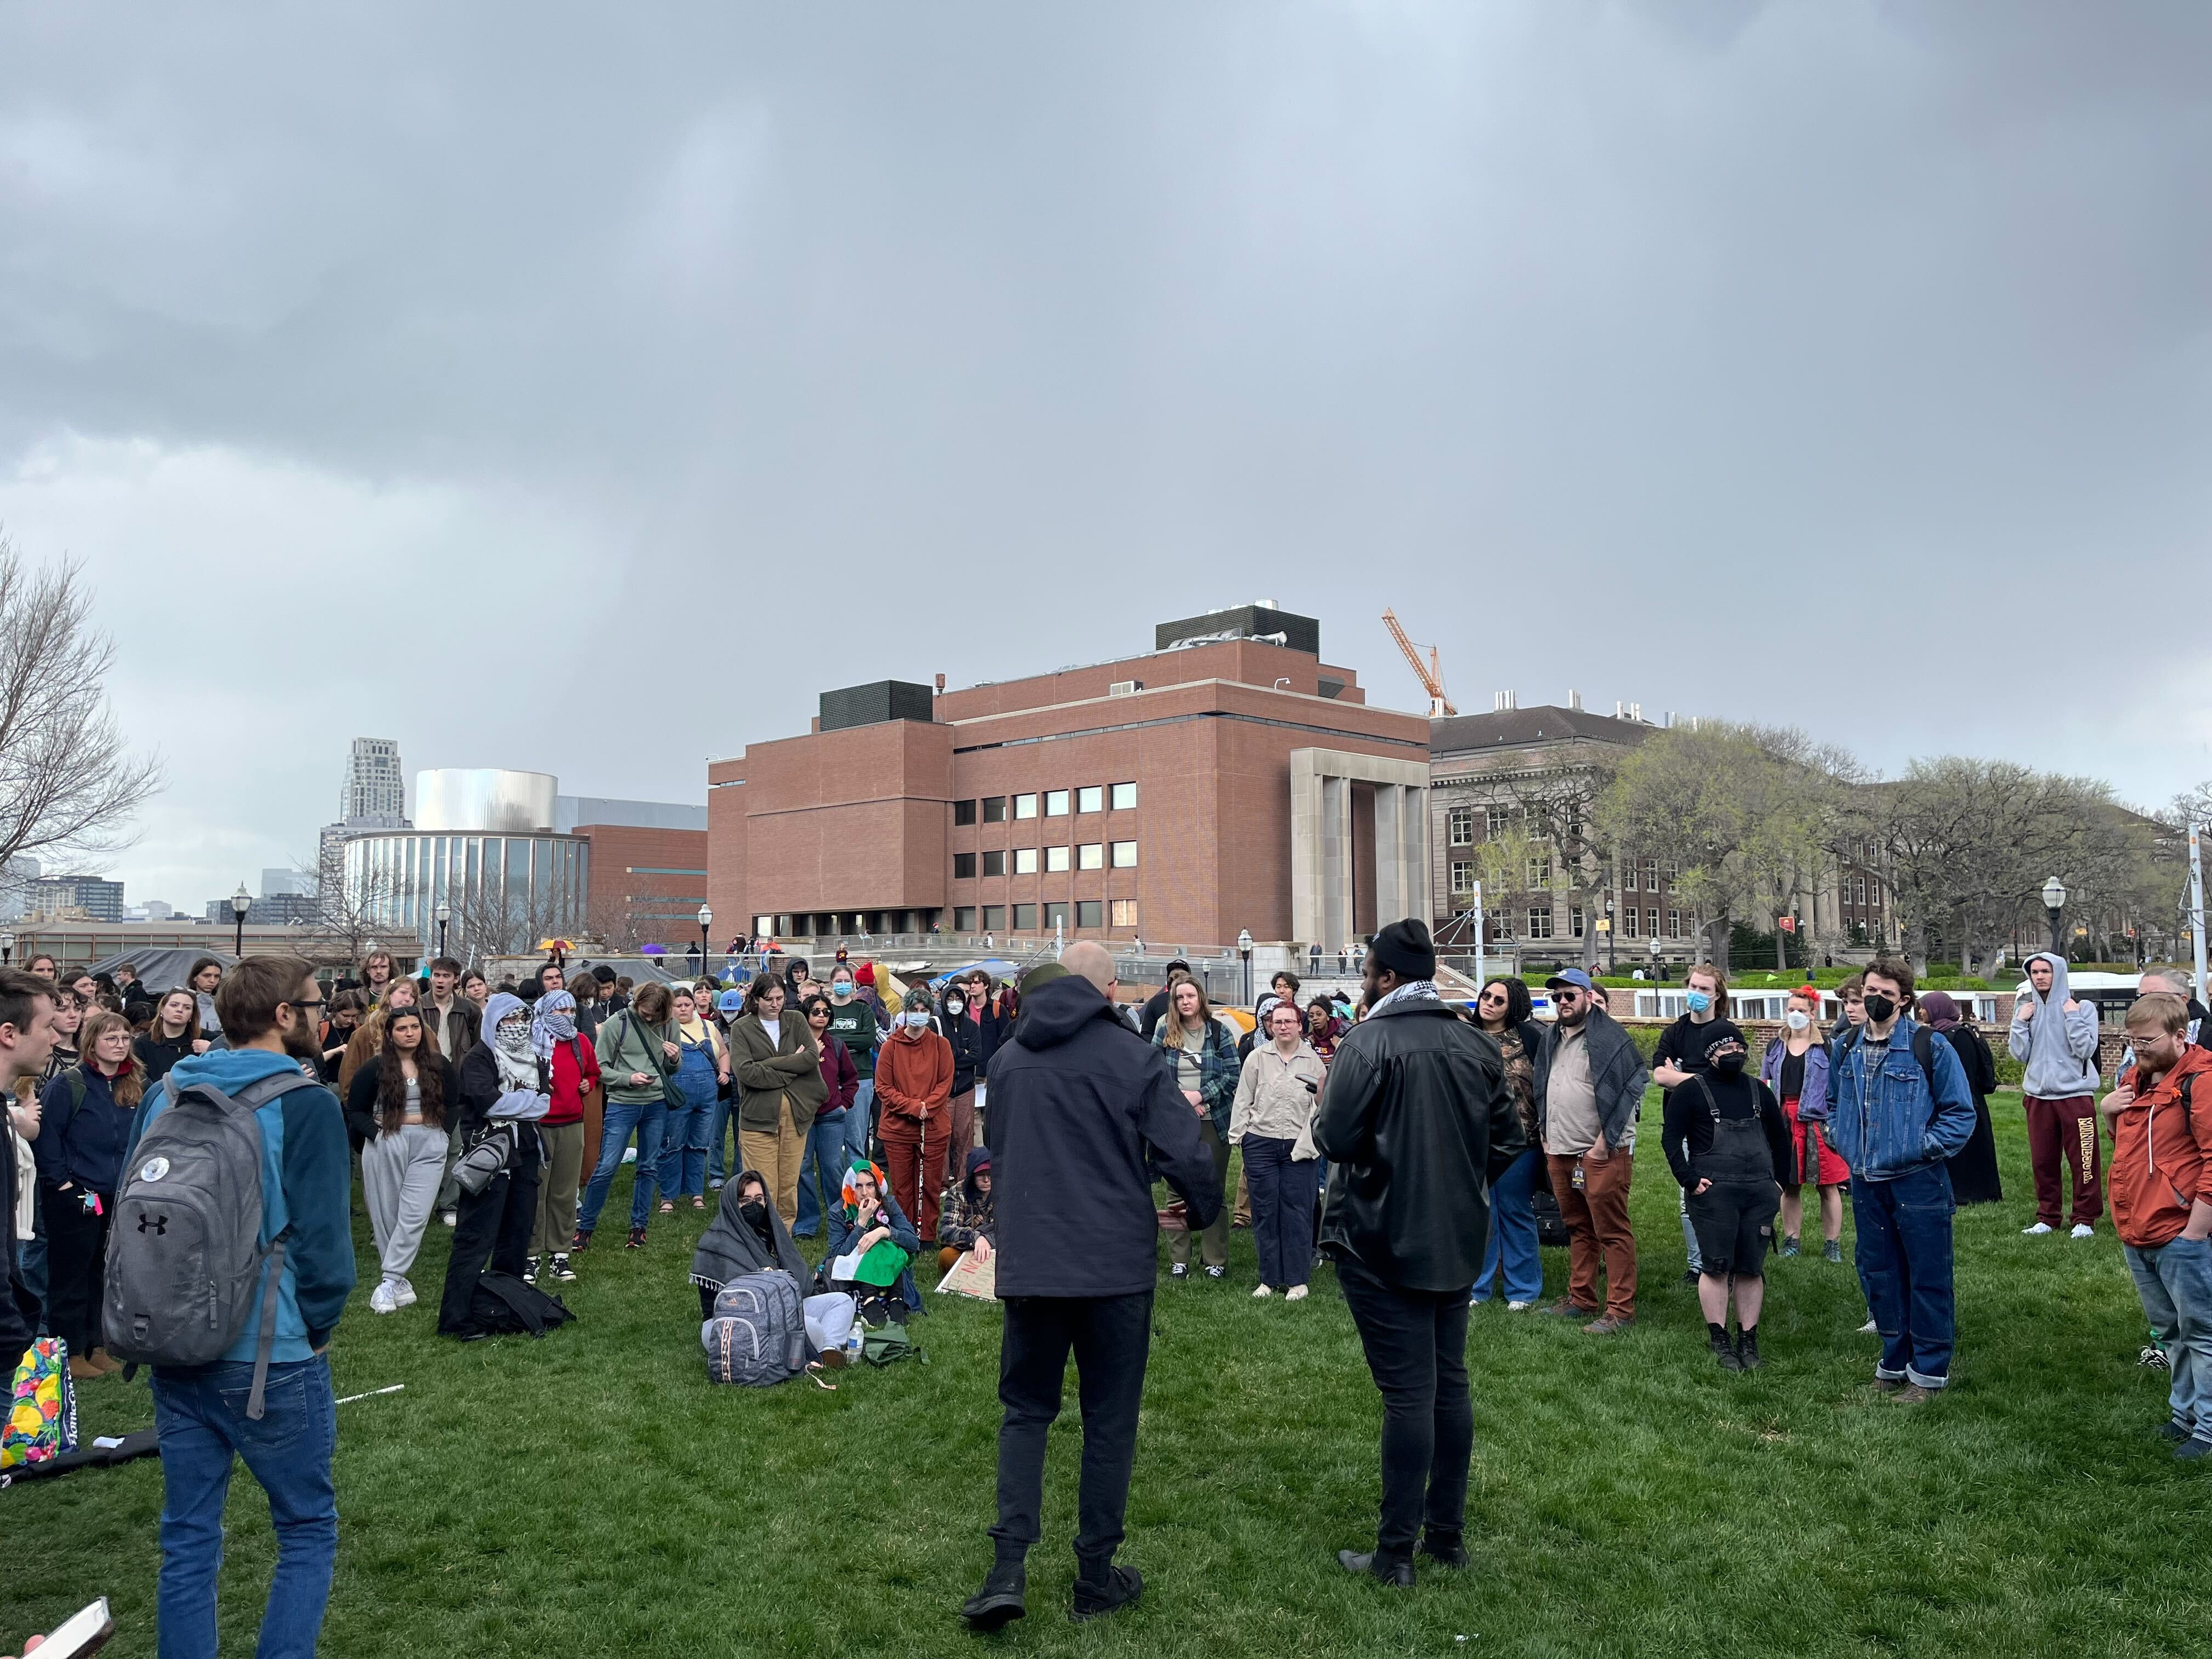 Jewish students at the University of Minnesota say campus protests are disrupting